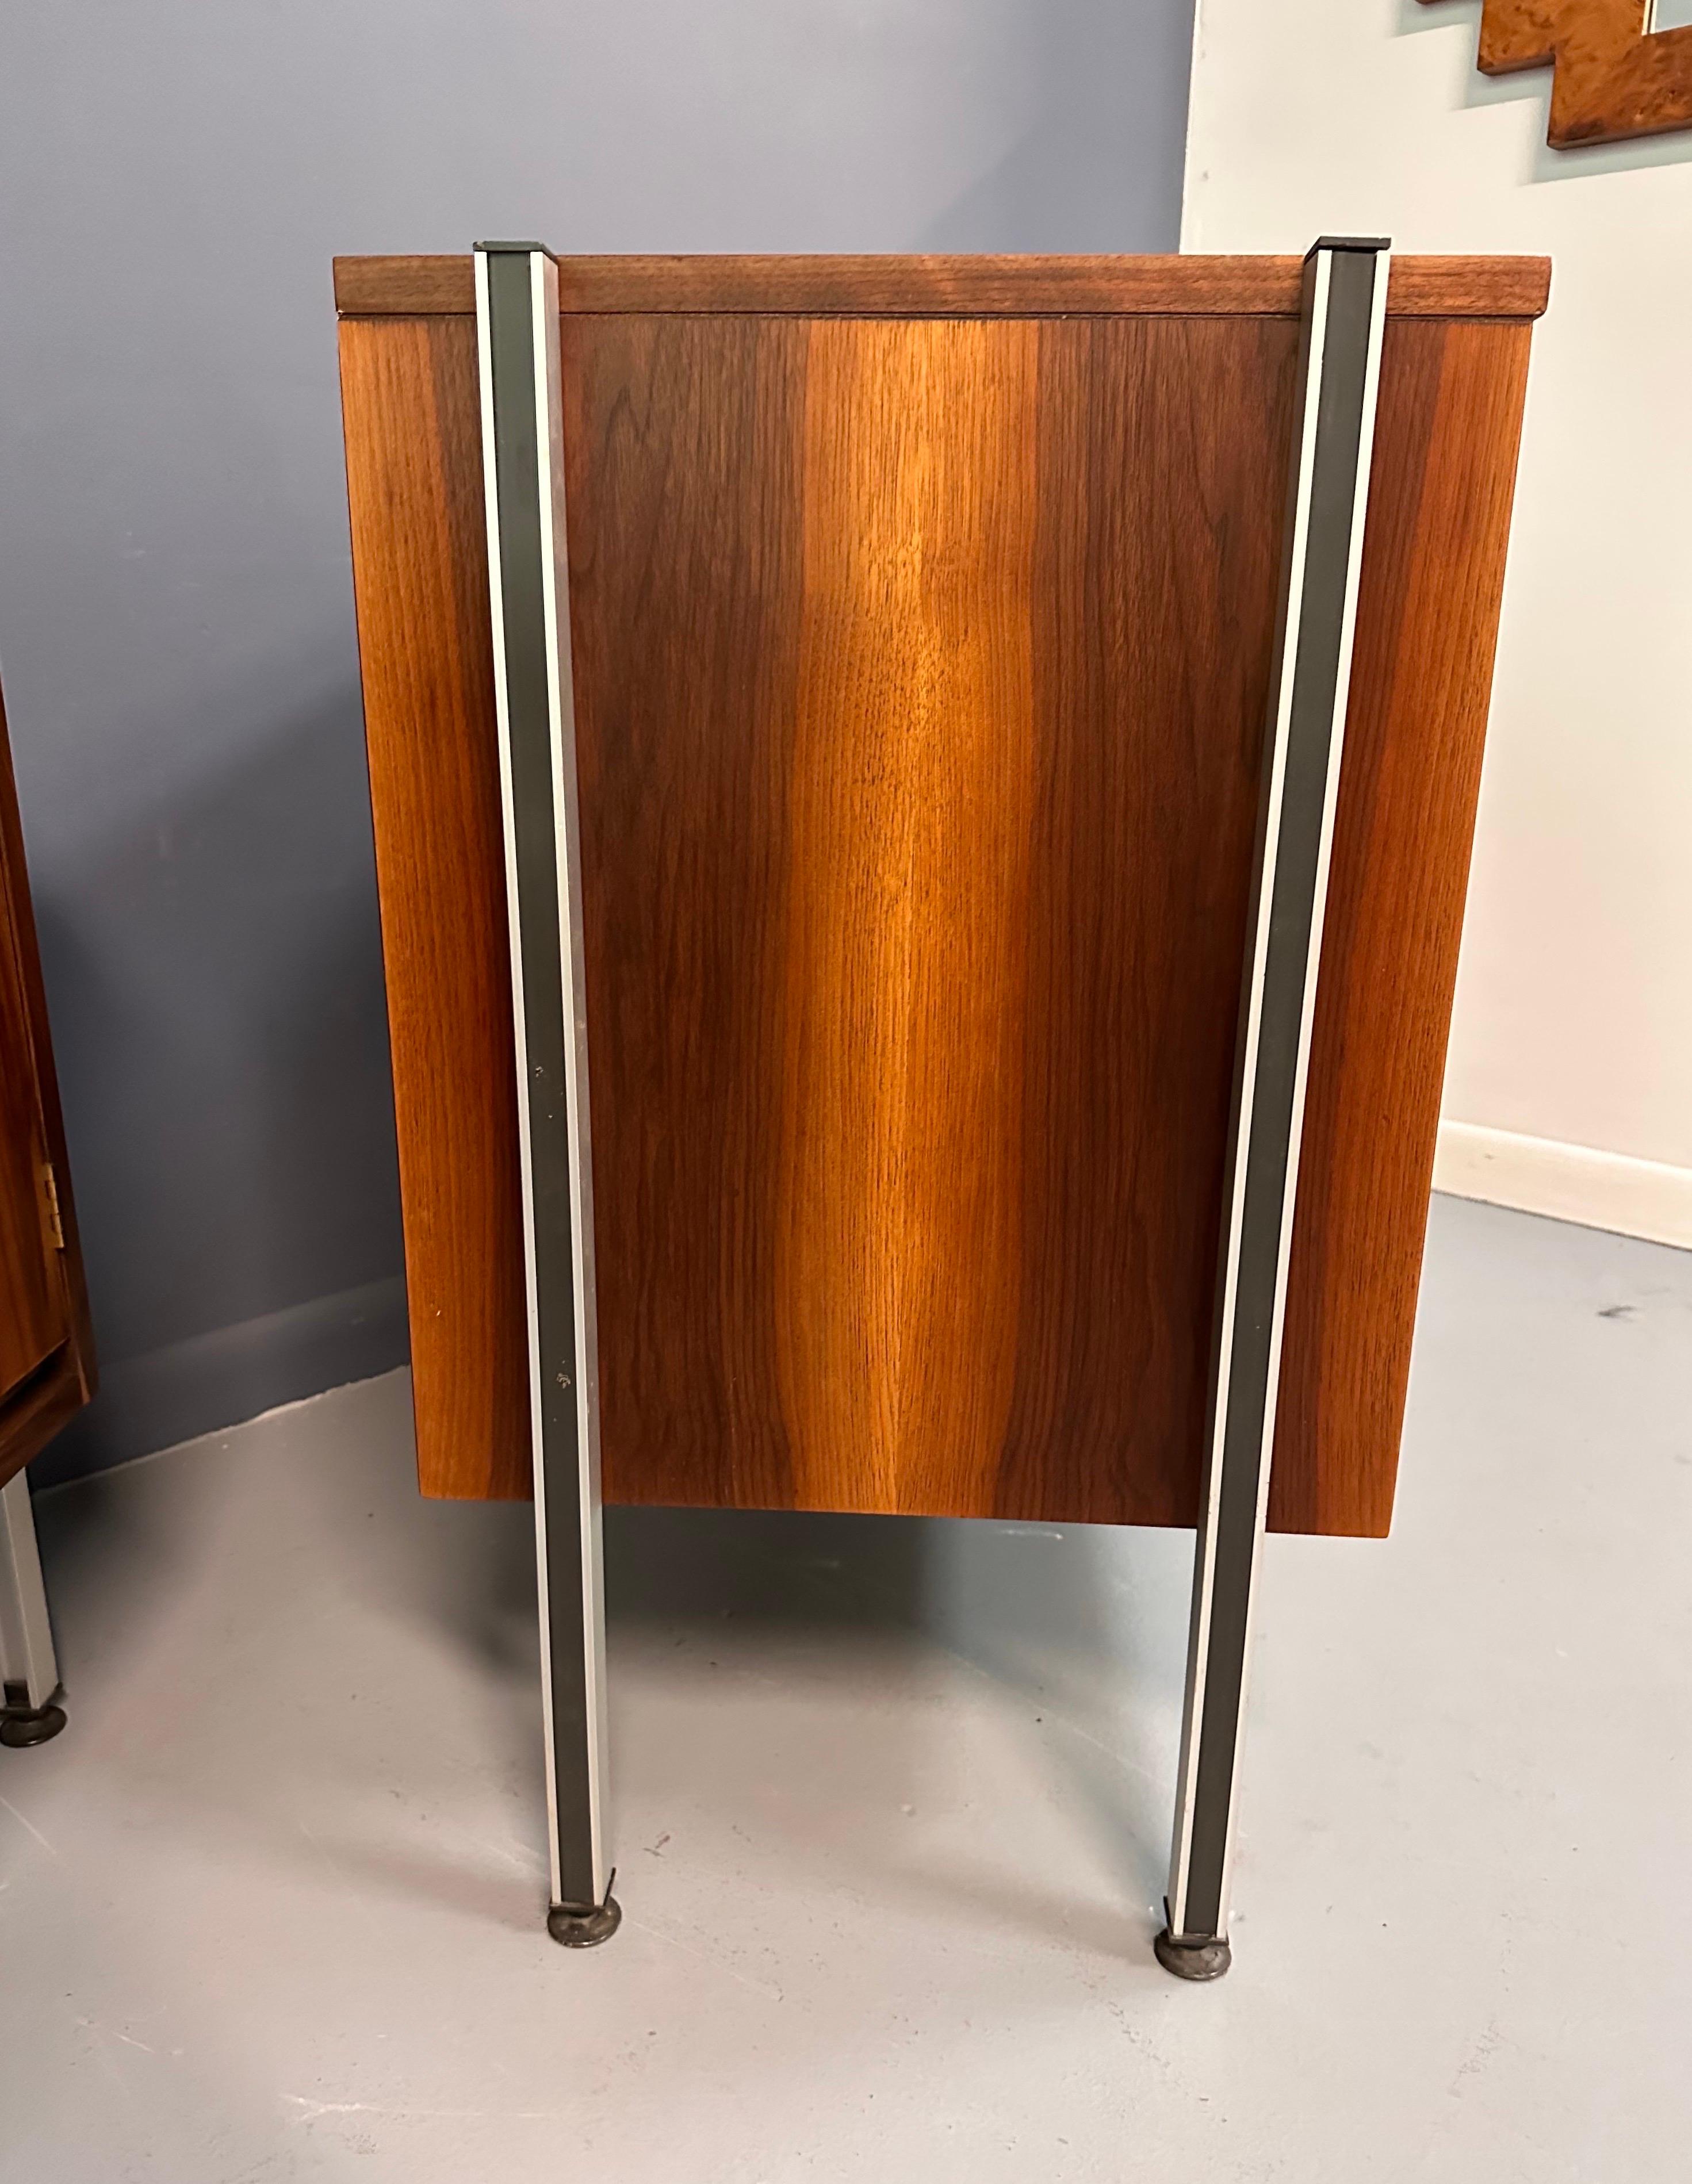 20th Century Pair of Midcentury Walnut Cabinets with Exposed Aluminum Legs Style of Wormley For Sale